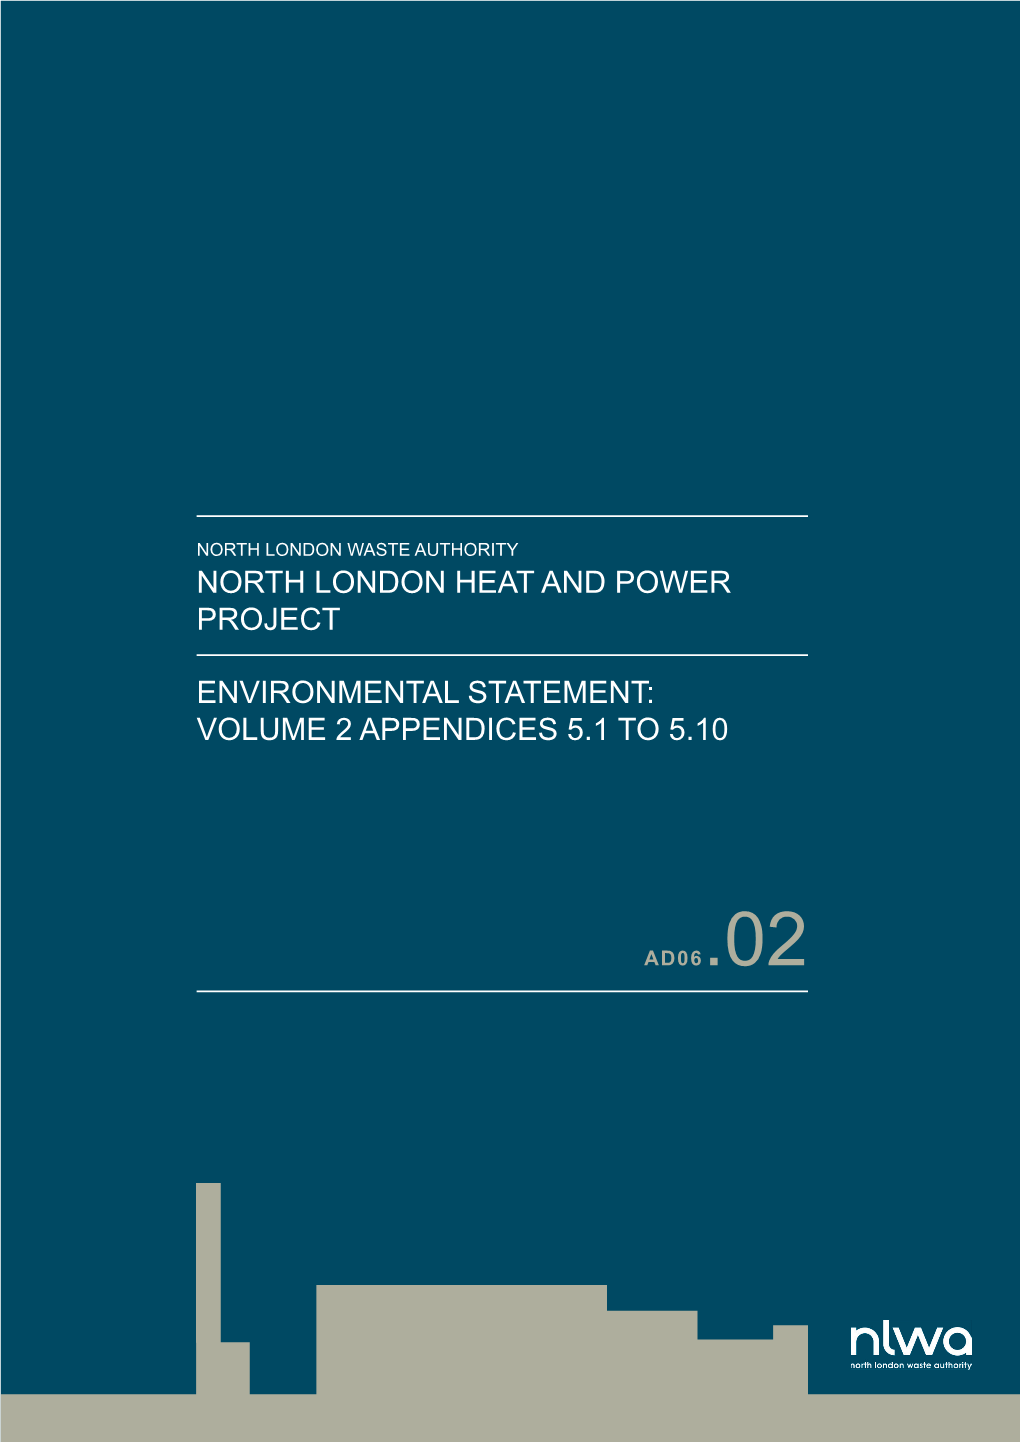 North London Heat and Power Project Environmental Statement: Volume 2 Appendices 5.1 to 5.10